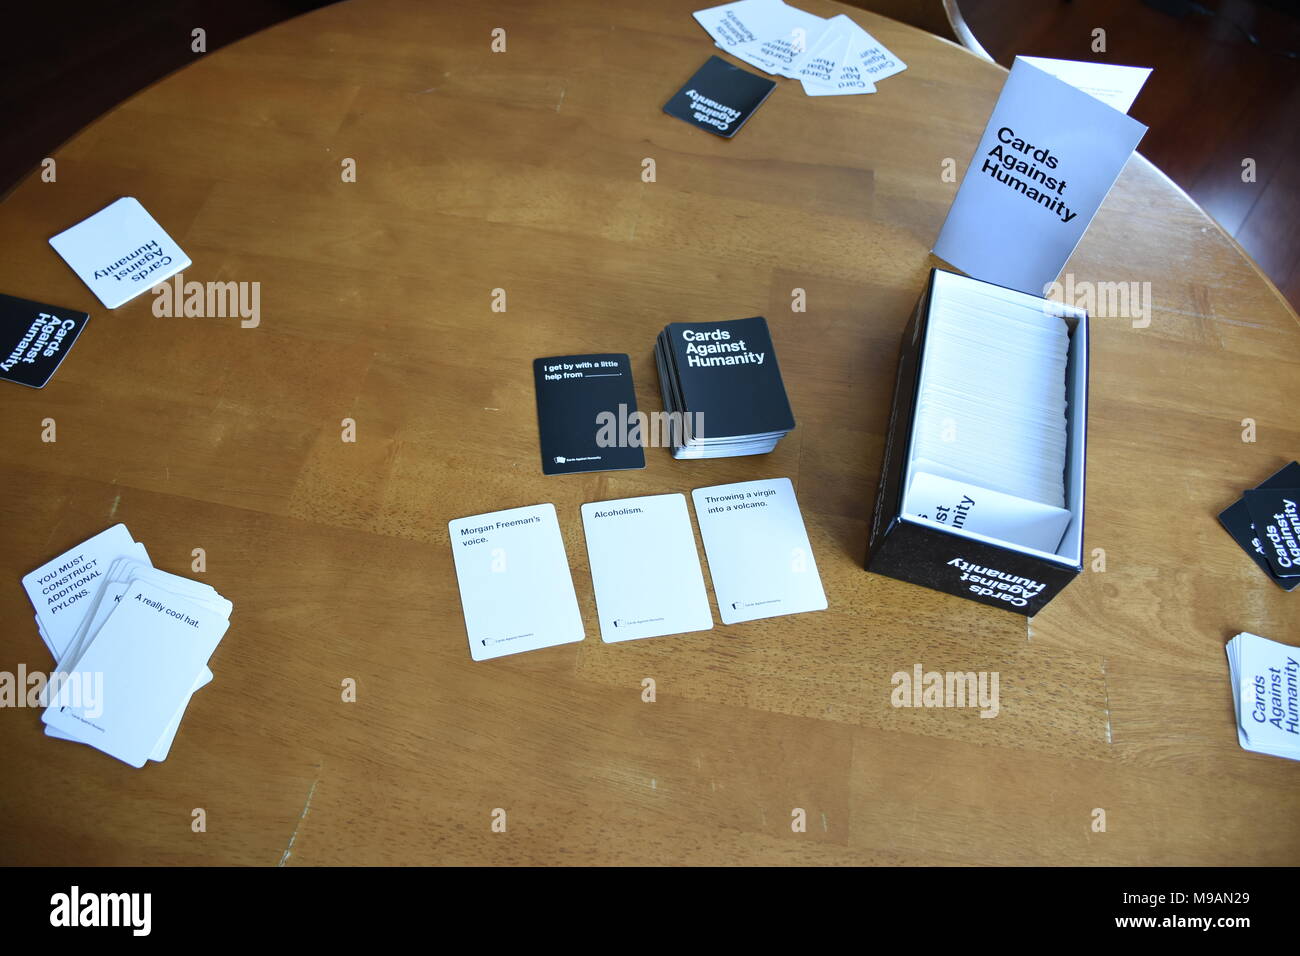 Cards Against Humanity In Play Stock Photo